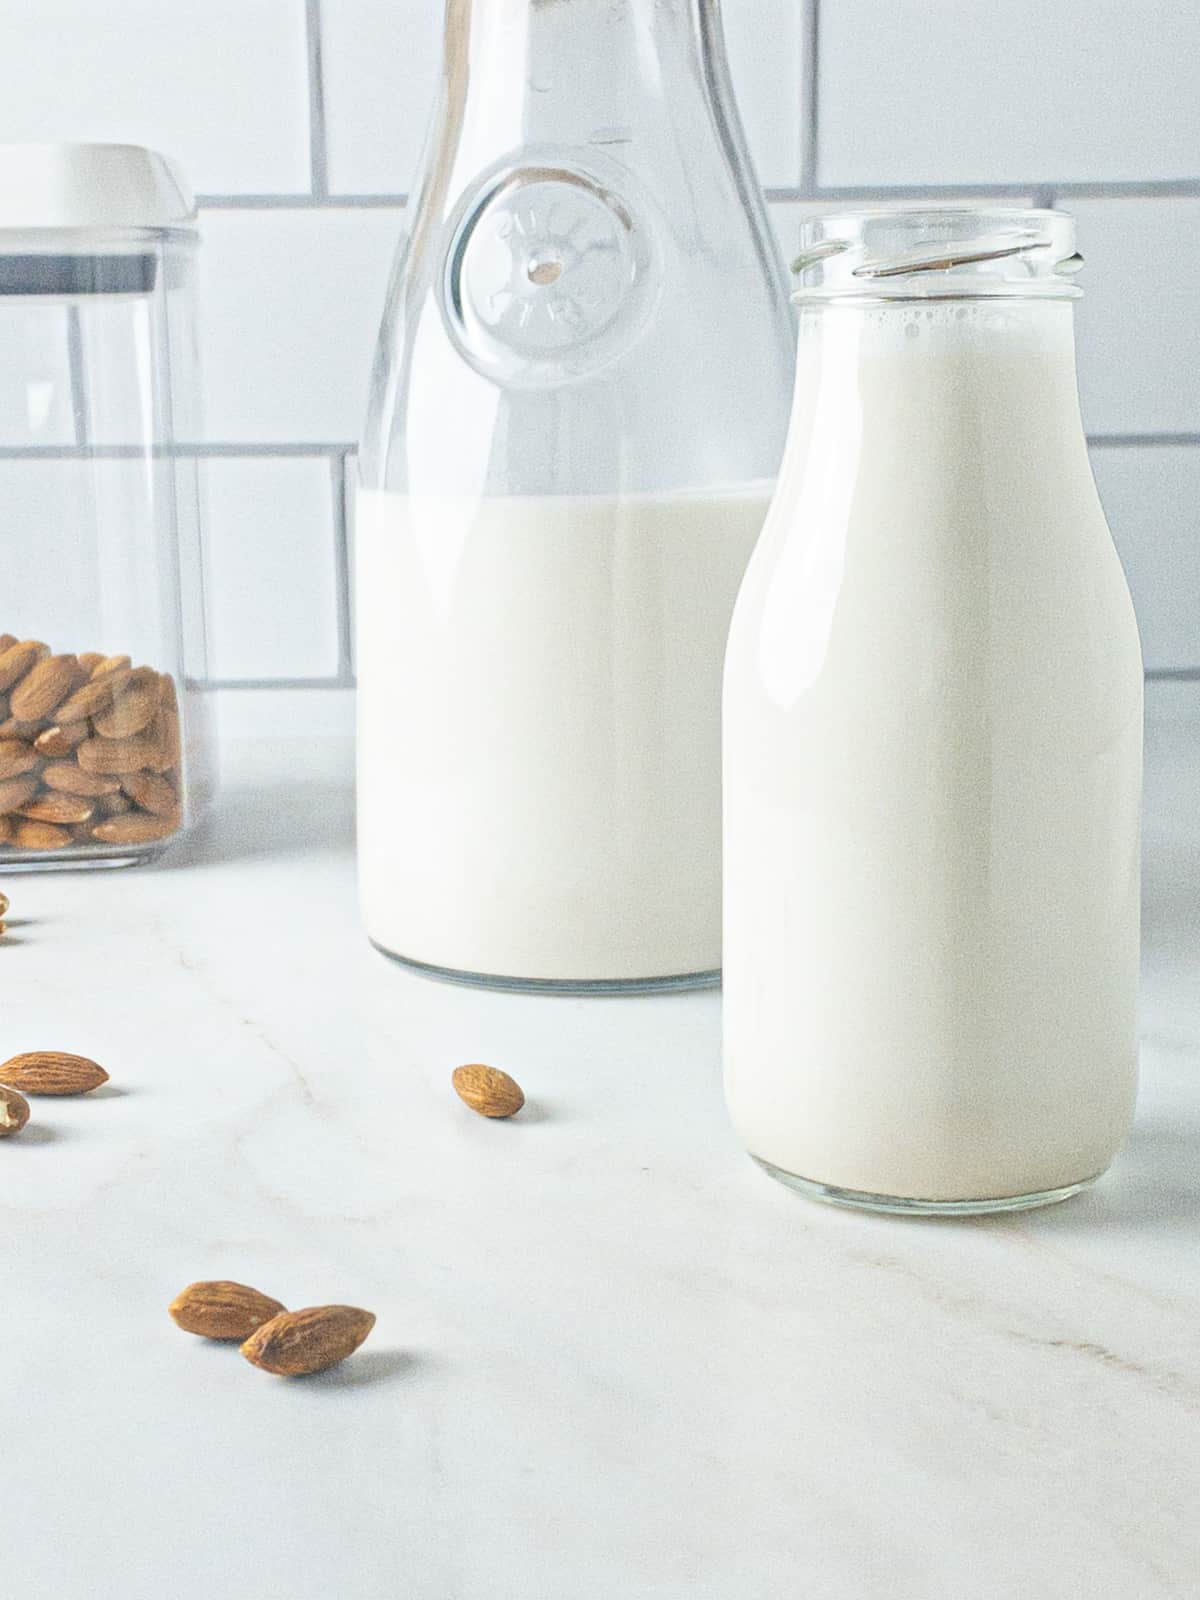 Homemade almond milk in a milk bottle with a carafe of almond milk behind it, and a container of almonds beside it.